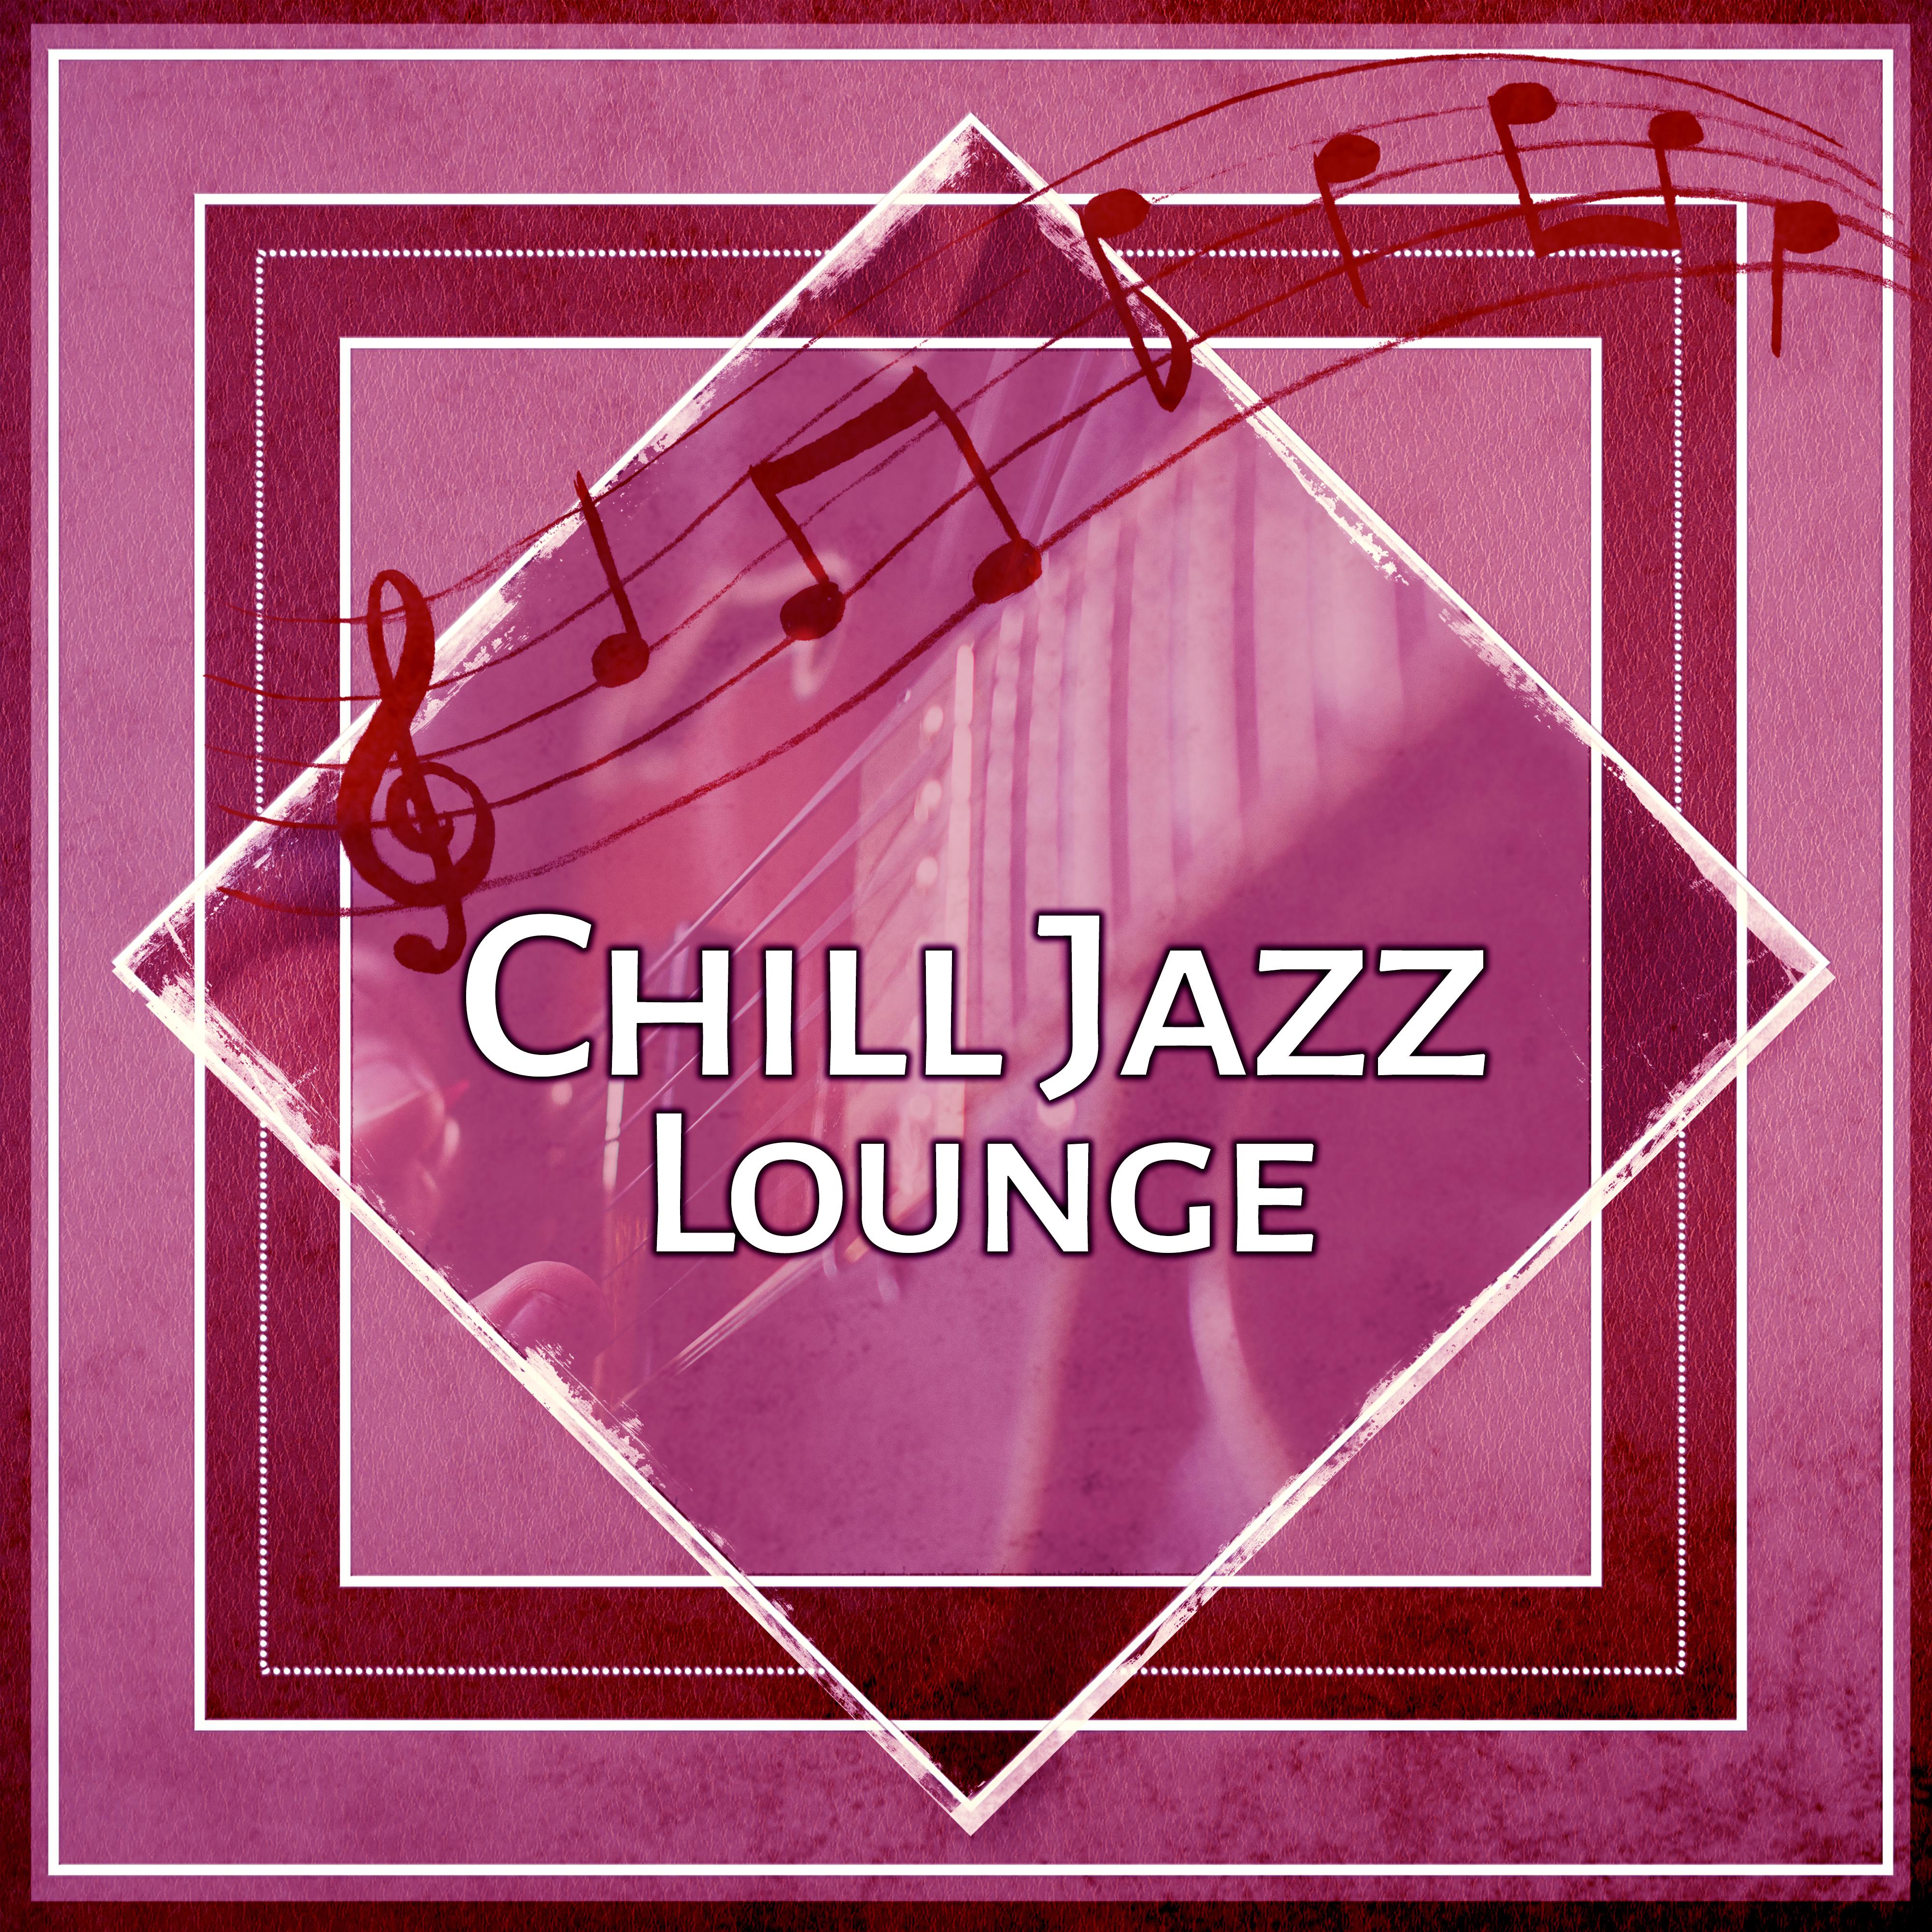 Chill Jazz Lounge – Smooth Jazz Lounge, Piano Bar, Mellow Jazz, Best Restaurant Music, Dinner Party Time